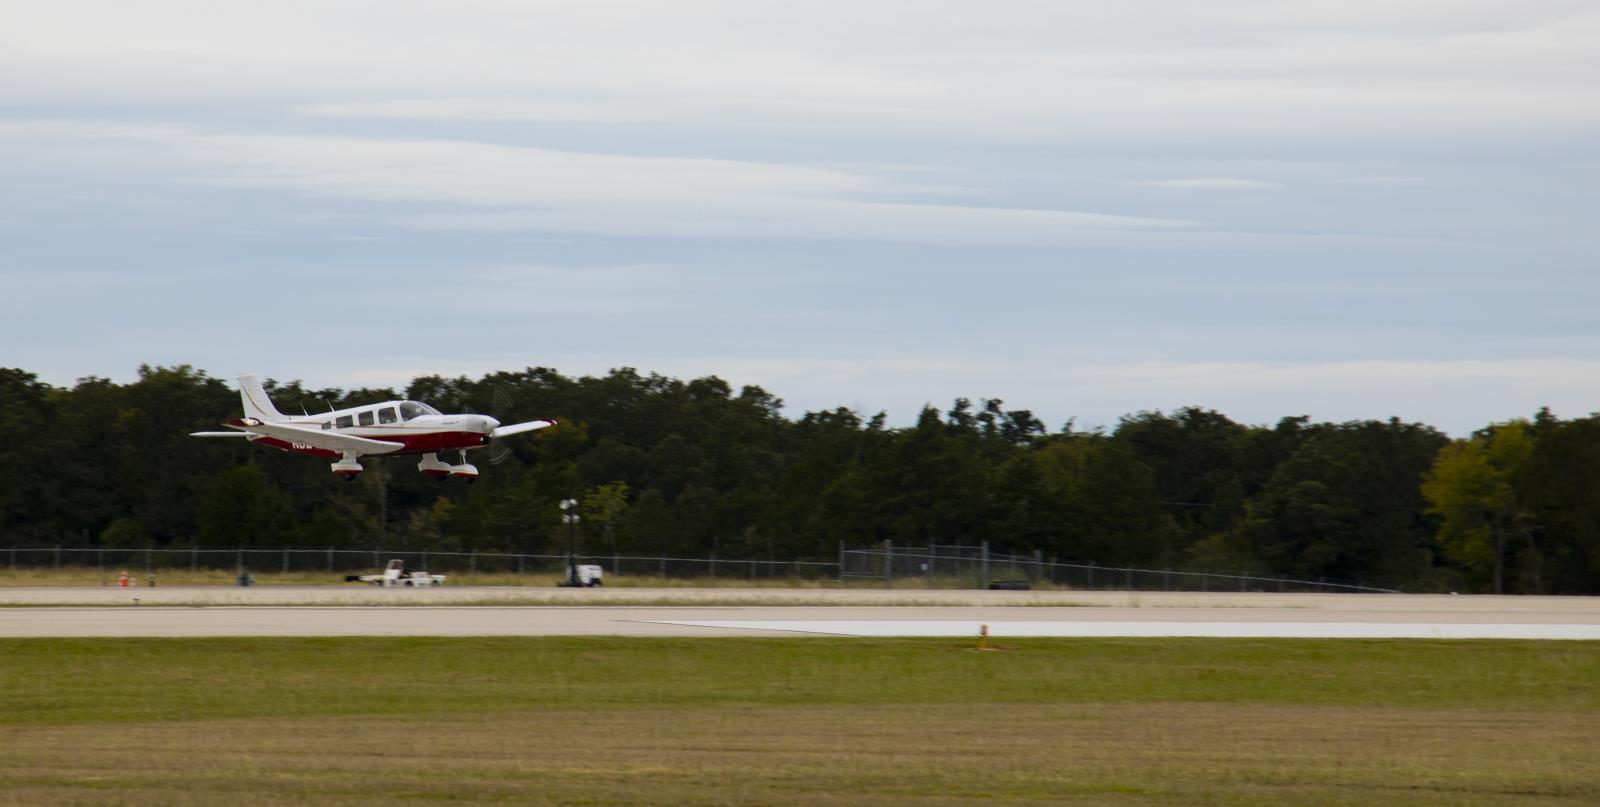 Ground effect takeoff at College Station